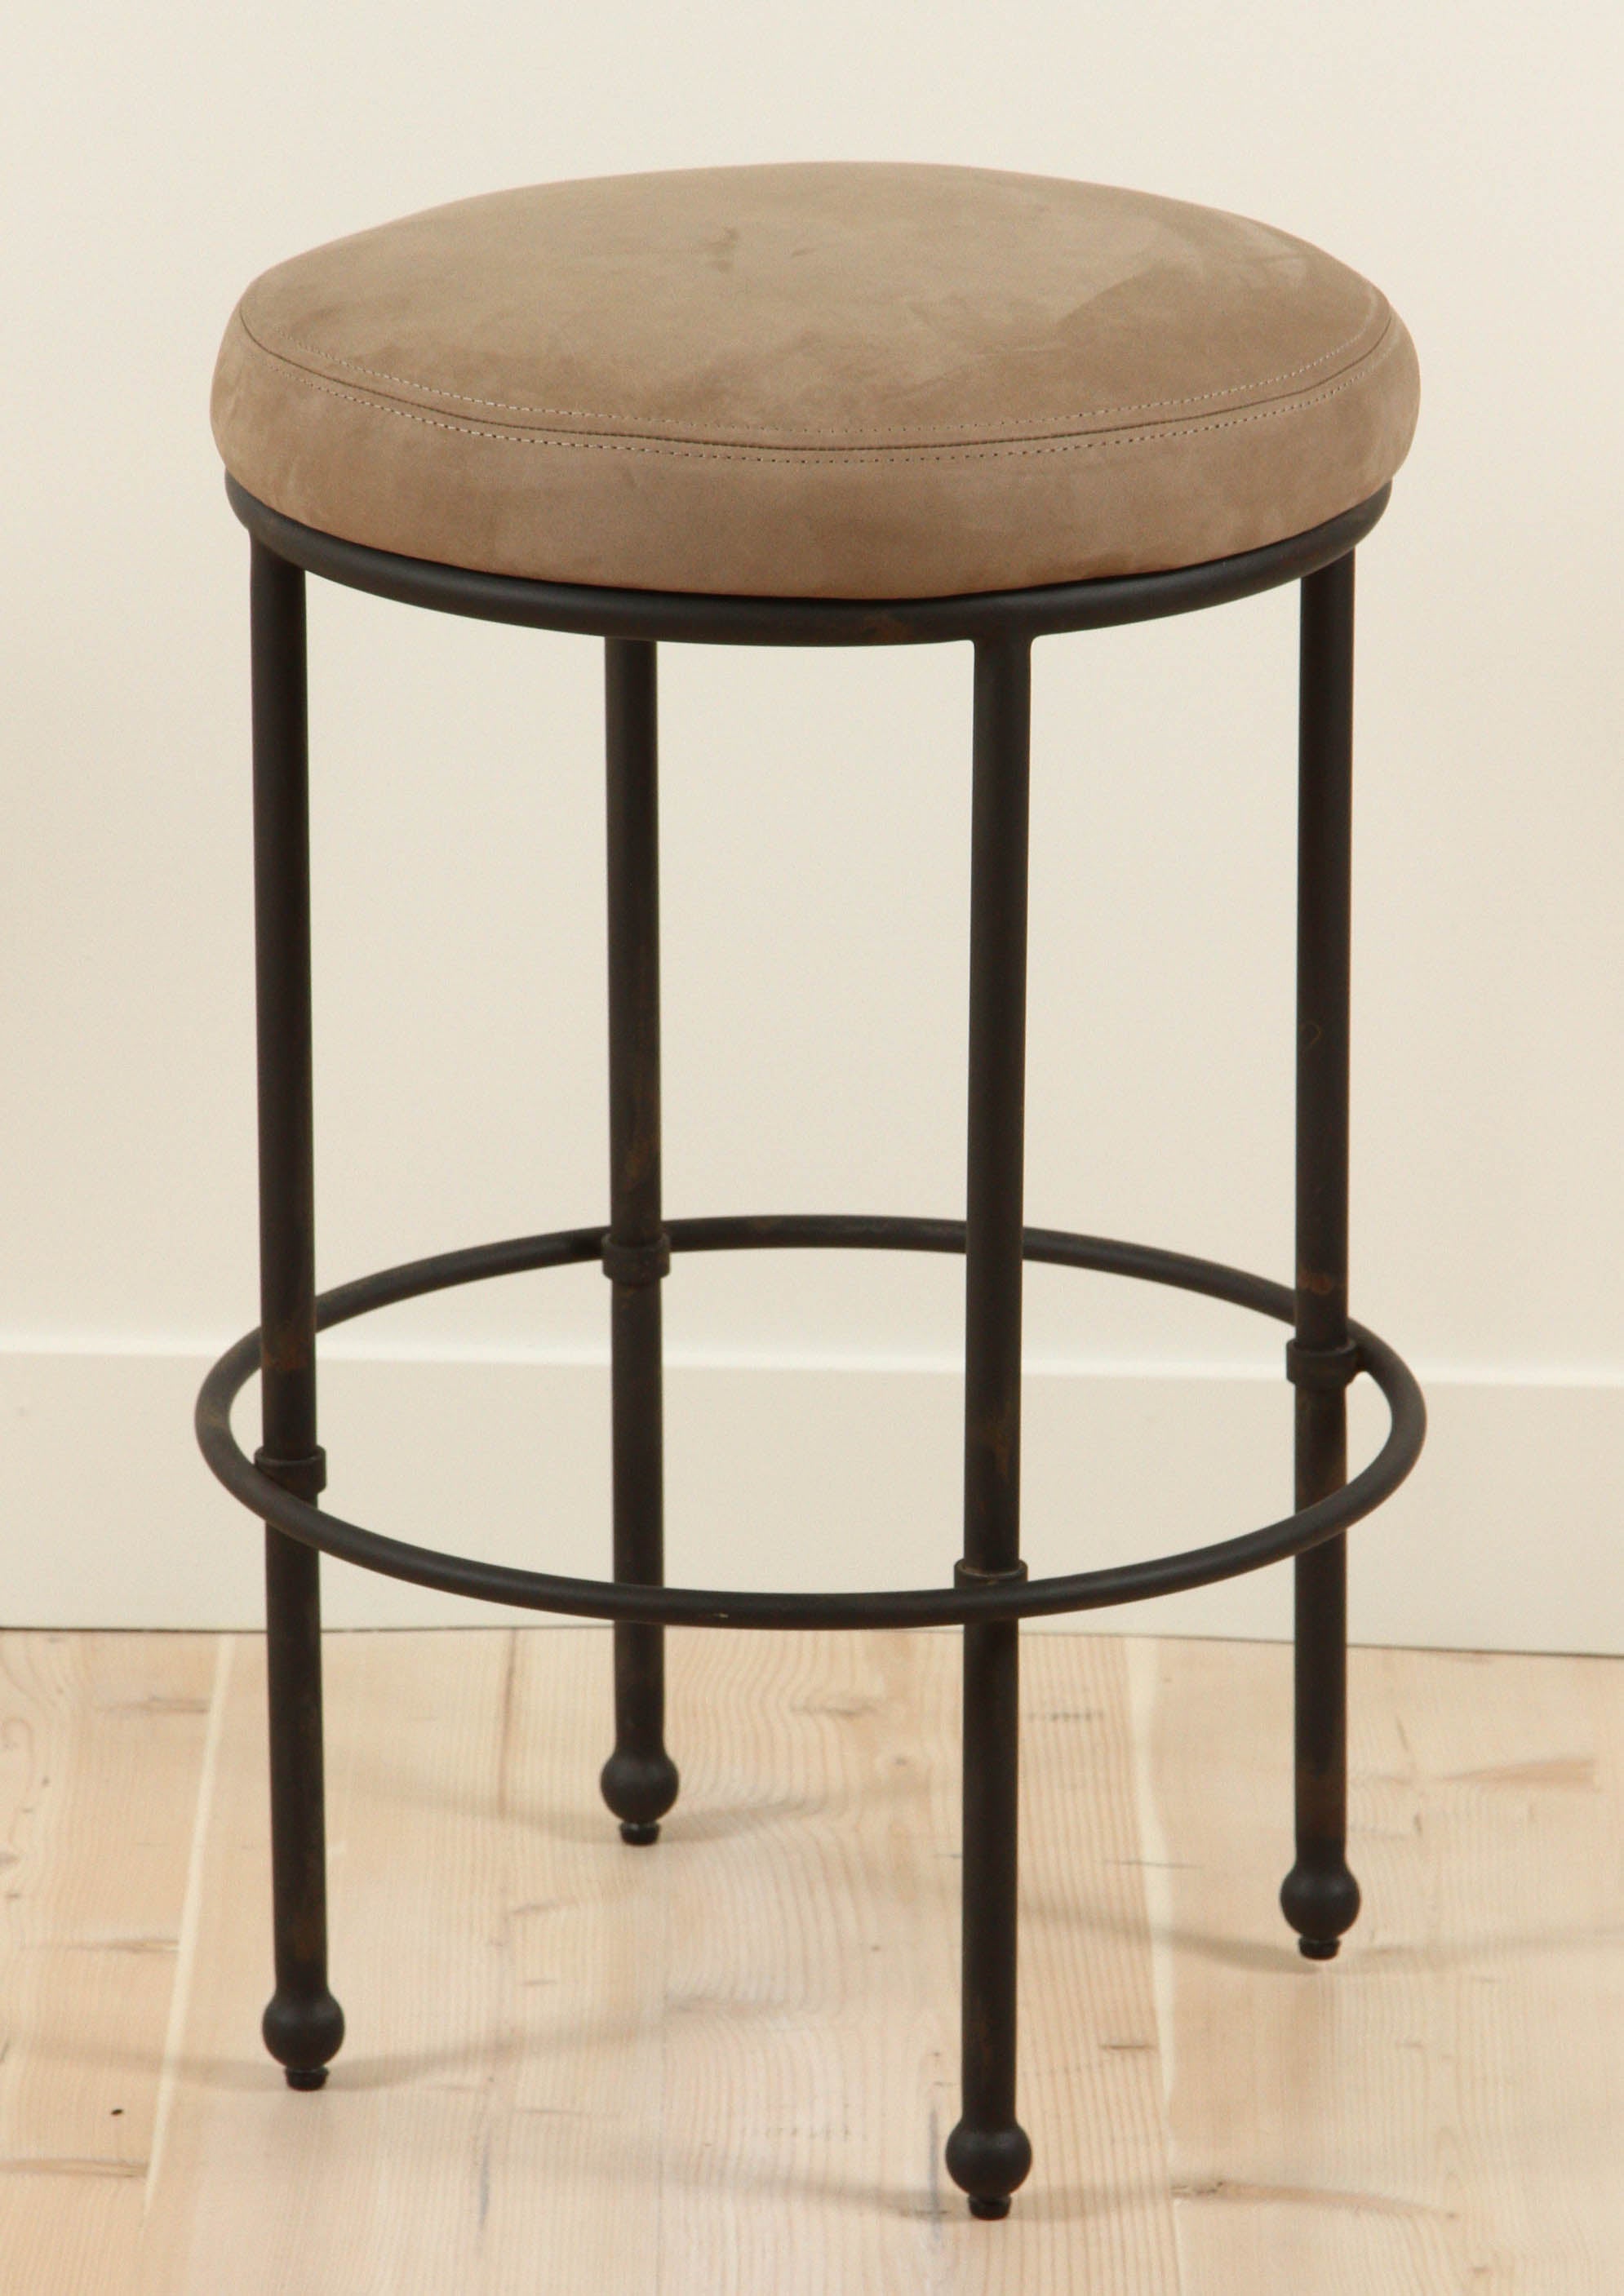 Orsini Counterstool in Nubuck and Blackned Steel by Lawson-Fenning